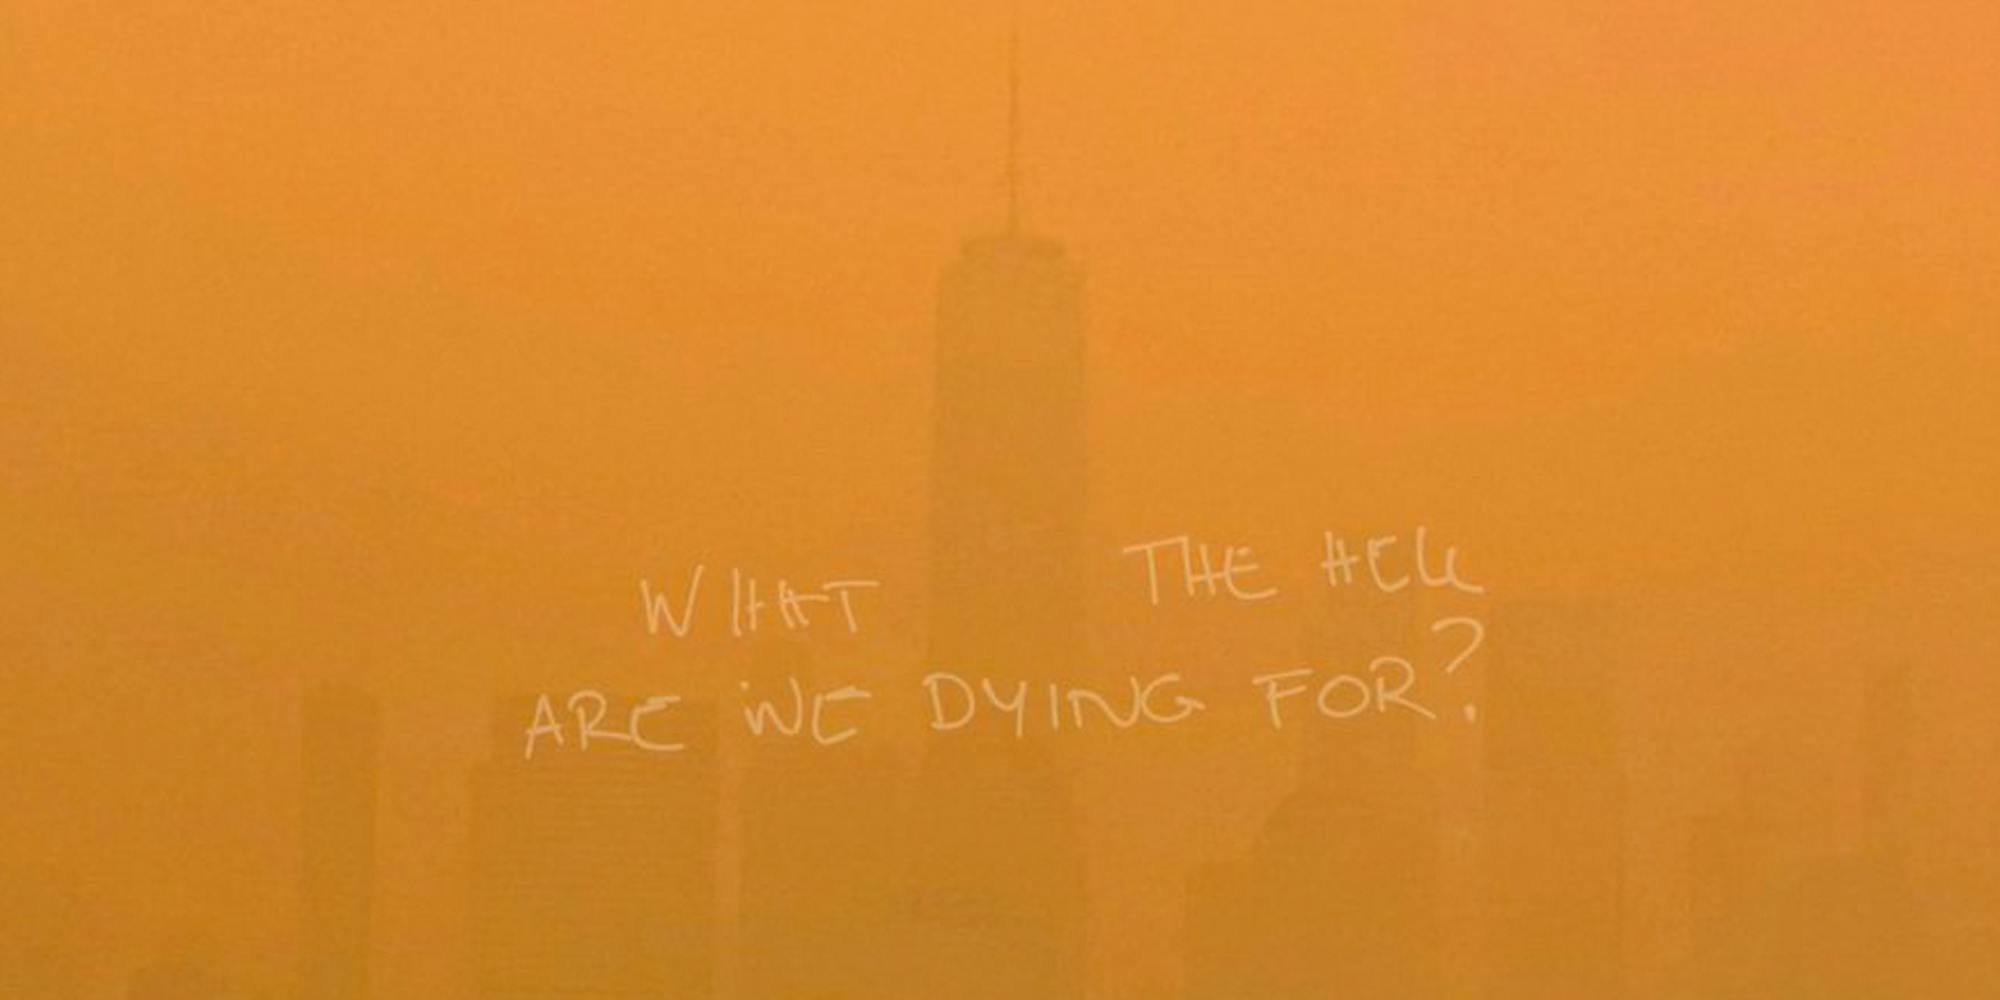 Shawn Mendes single artwork WHAT THE HELL ARE WE DYING FOR?